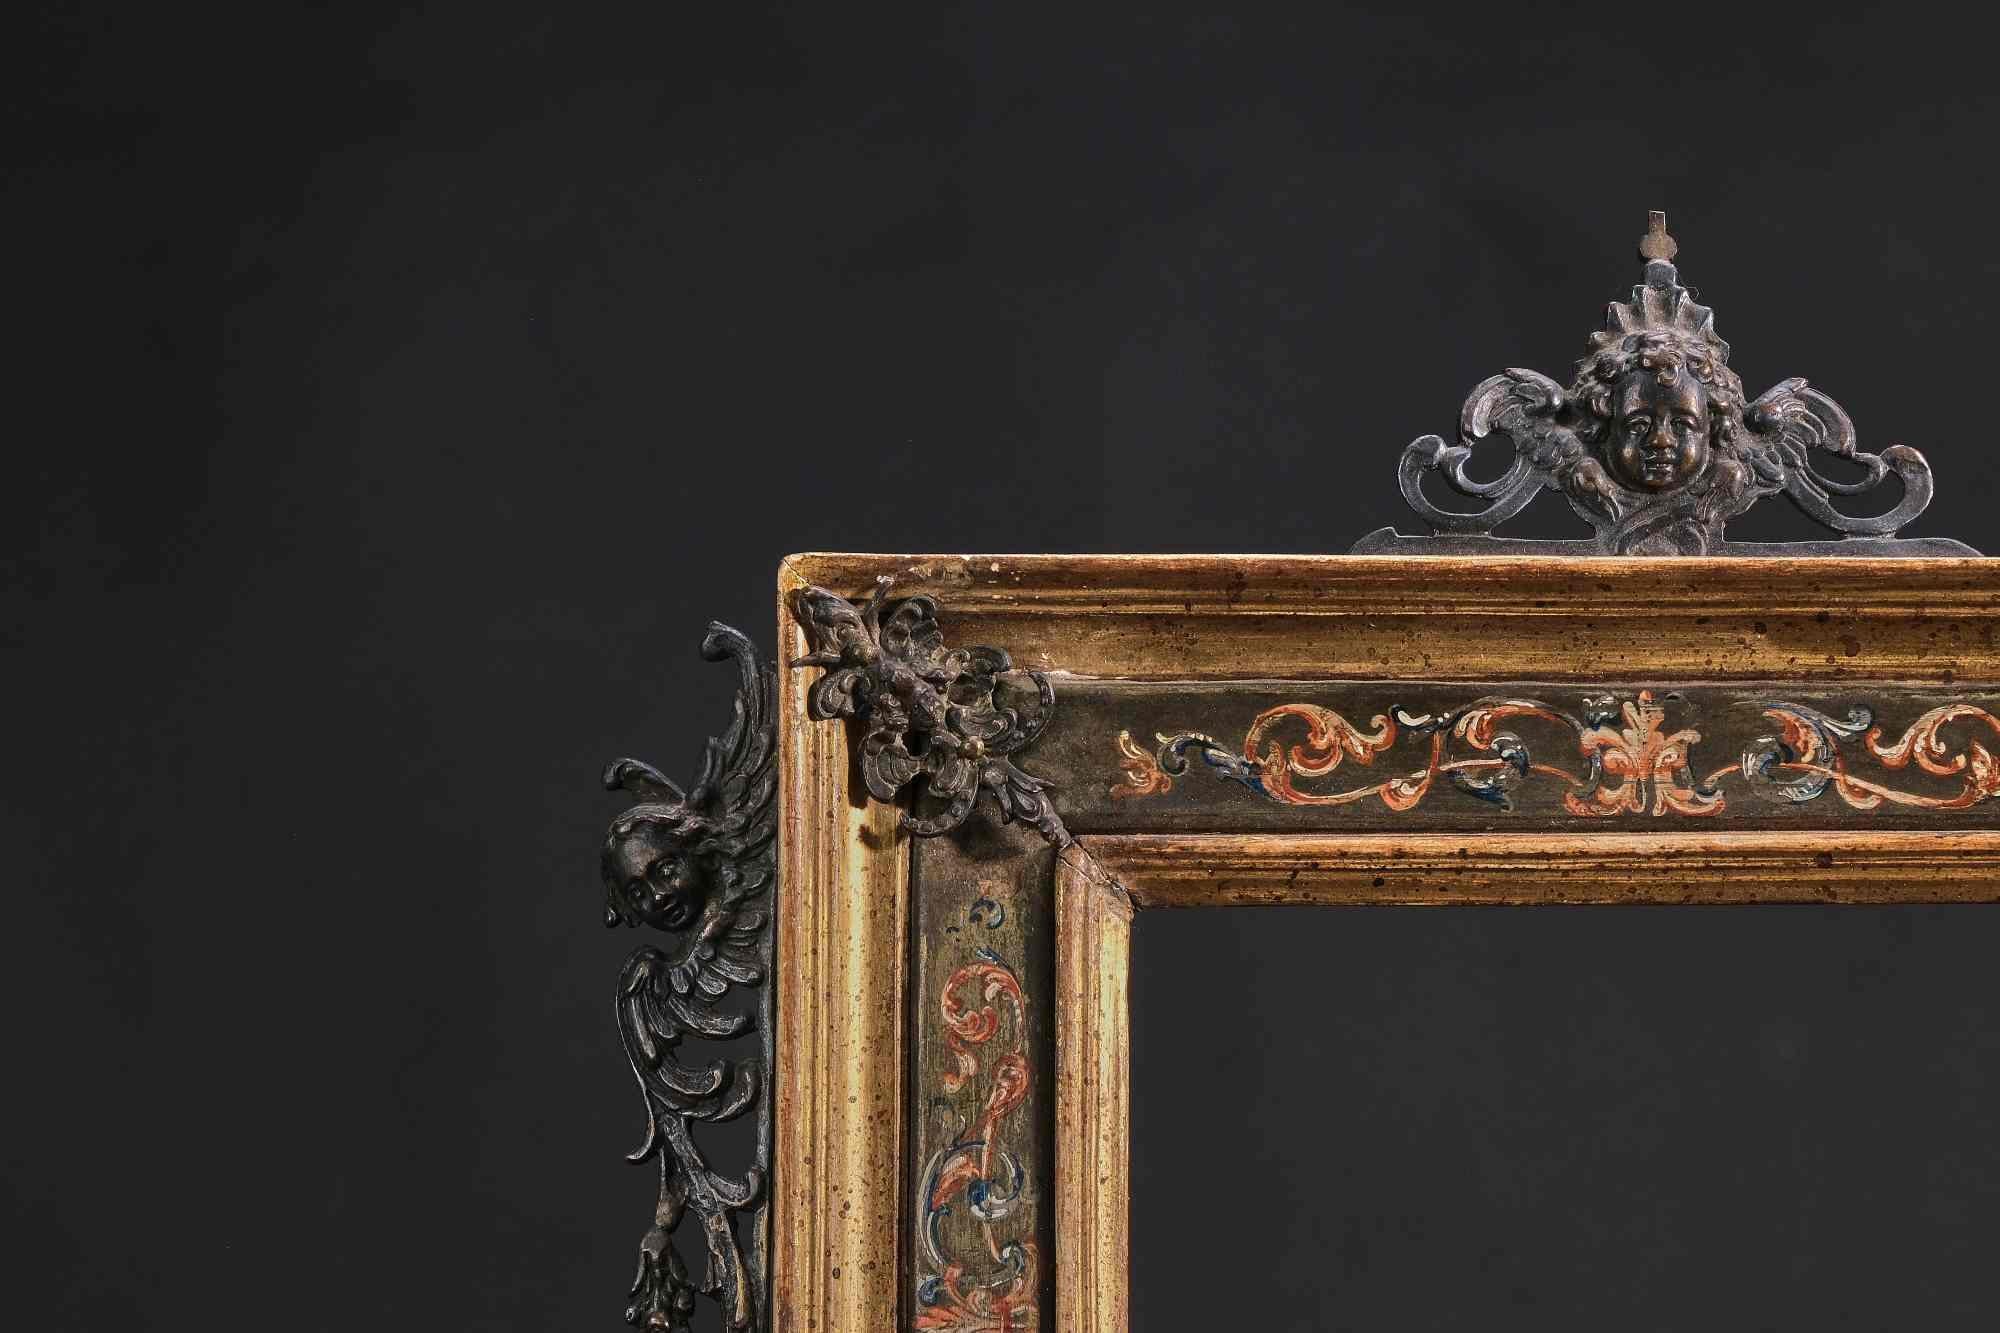 Rare gilded wooden frame qualified by a polychrome painted metal band with tiny foliage ornaments. Silver metal sconces chiselled with cherub heads between scrolls. Rome, 17th Two corner mounts in the frame are complemented by other elements HD